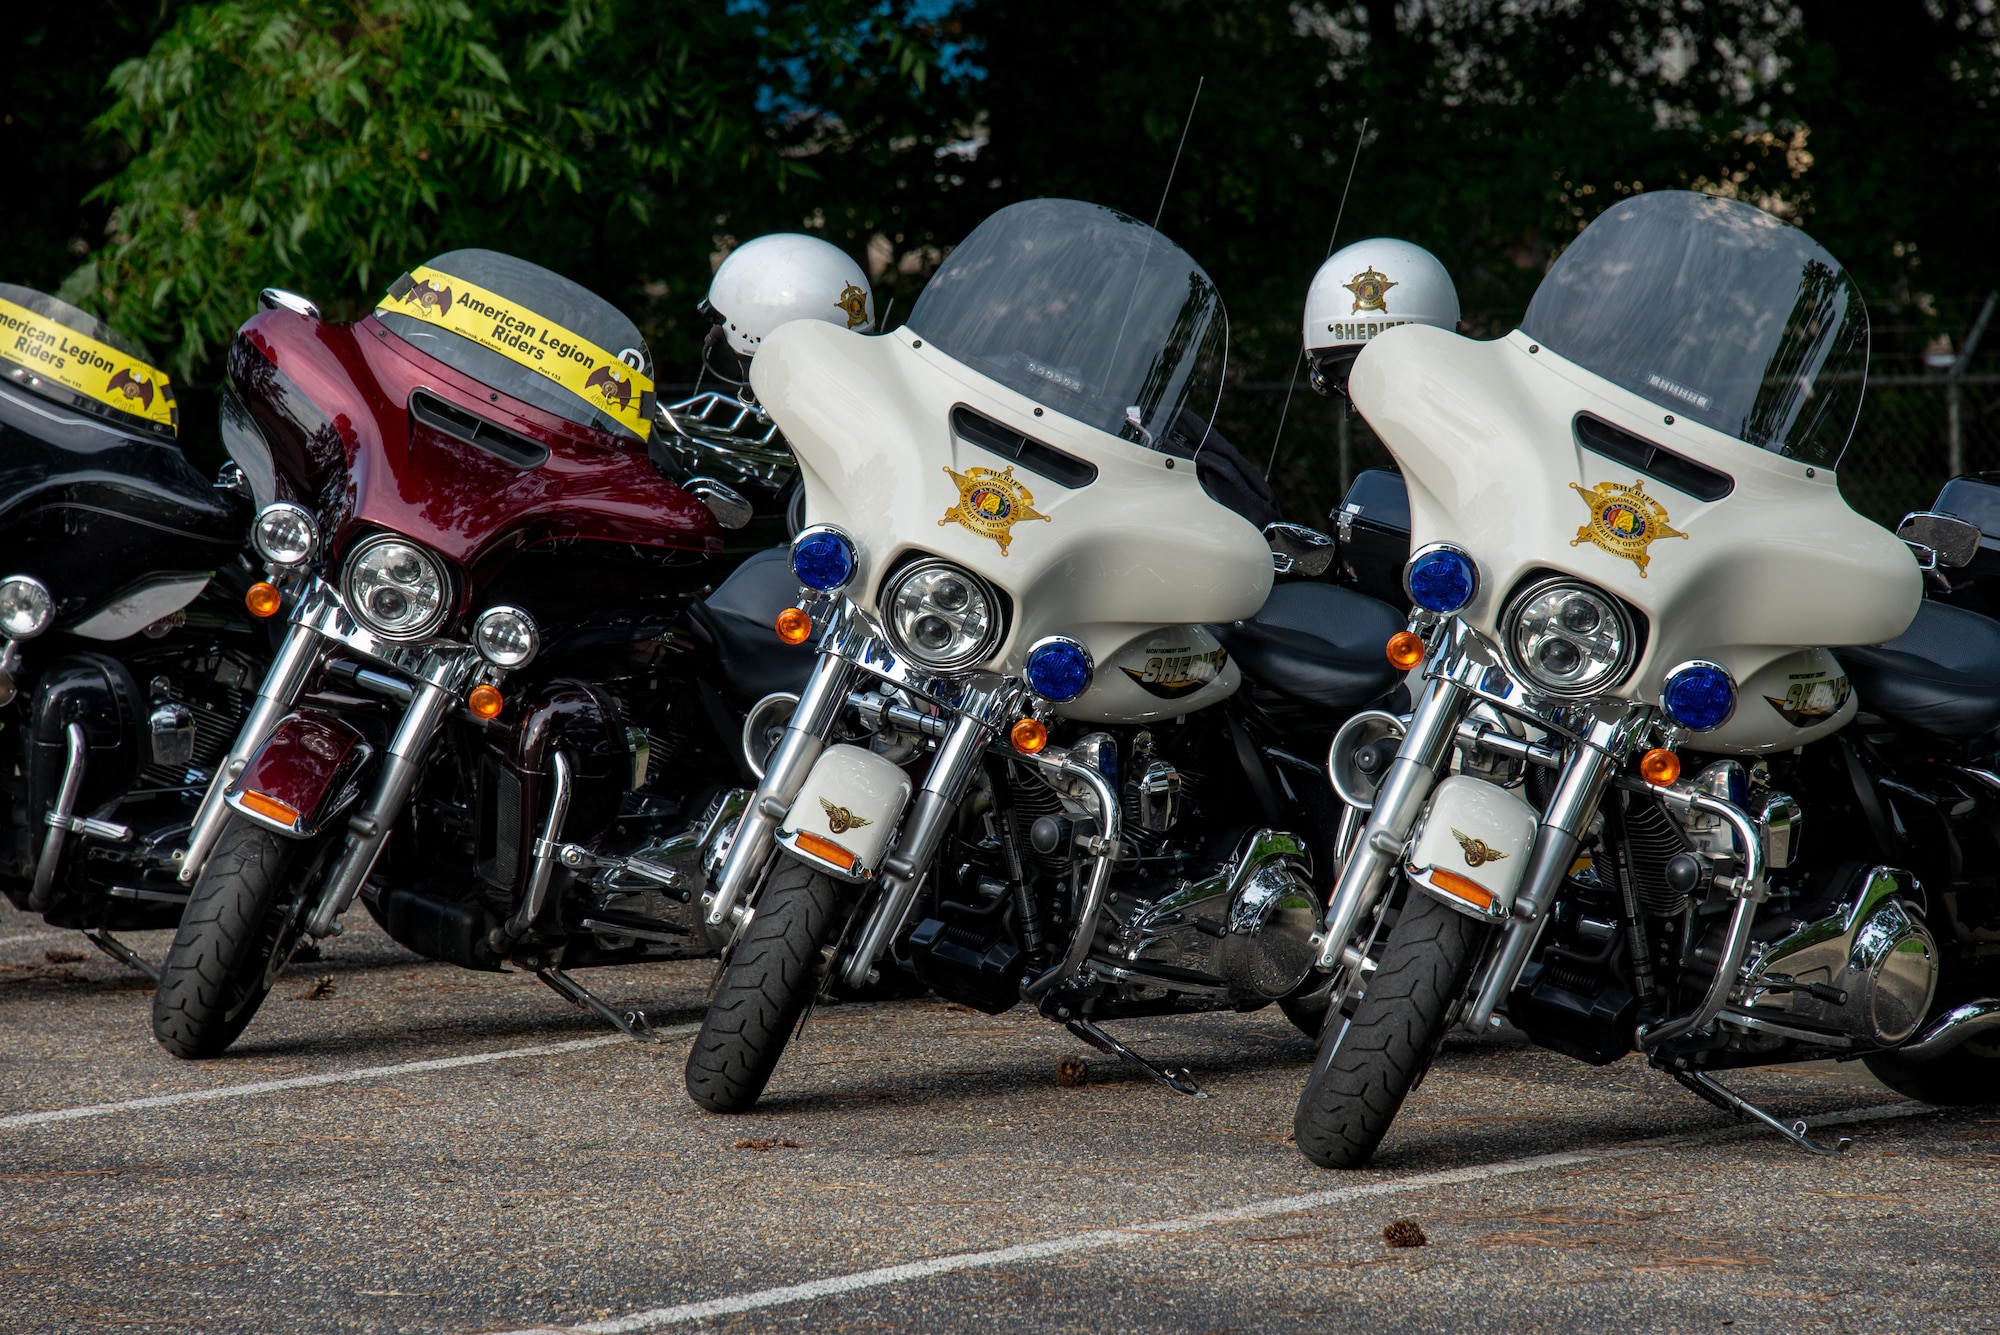 Montgomery County Sherriff Department cruisers and American Legion motorcycles line a parking lot on Maxwell Air Force Base, Ala., during Motorcycle Safety Day, June 27, 2017. Motorcycle Safety Day was held to have multiple cycle riders from throughout base come together and focus on how to become a safer and better rider. (US Air Force photo/Melanie Rodgers Cox/Released)